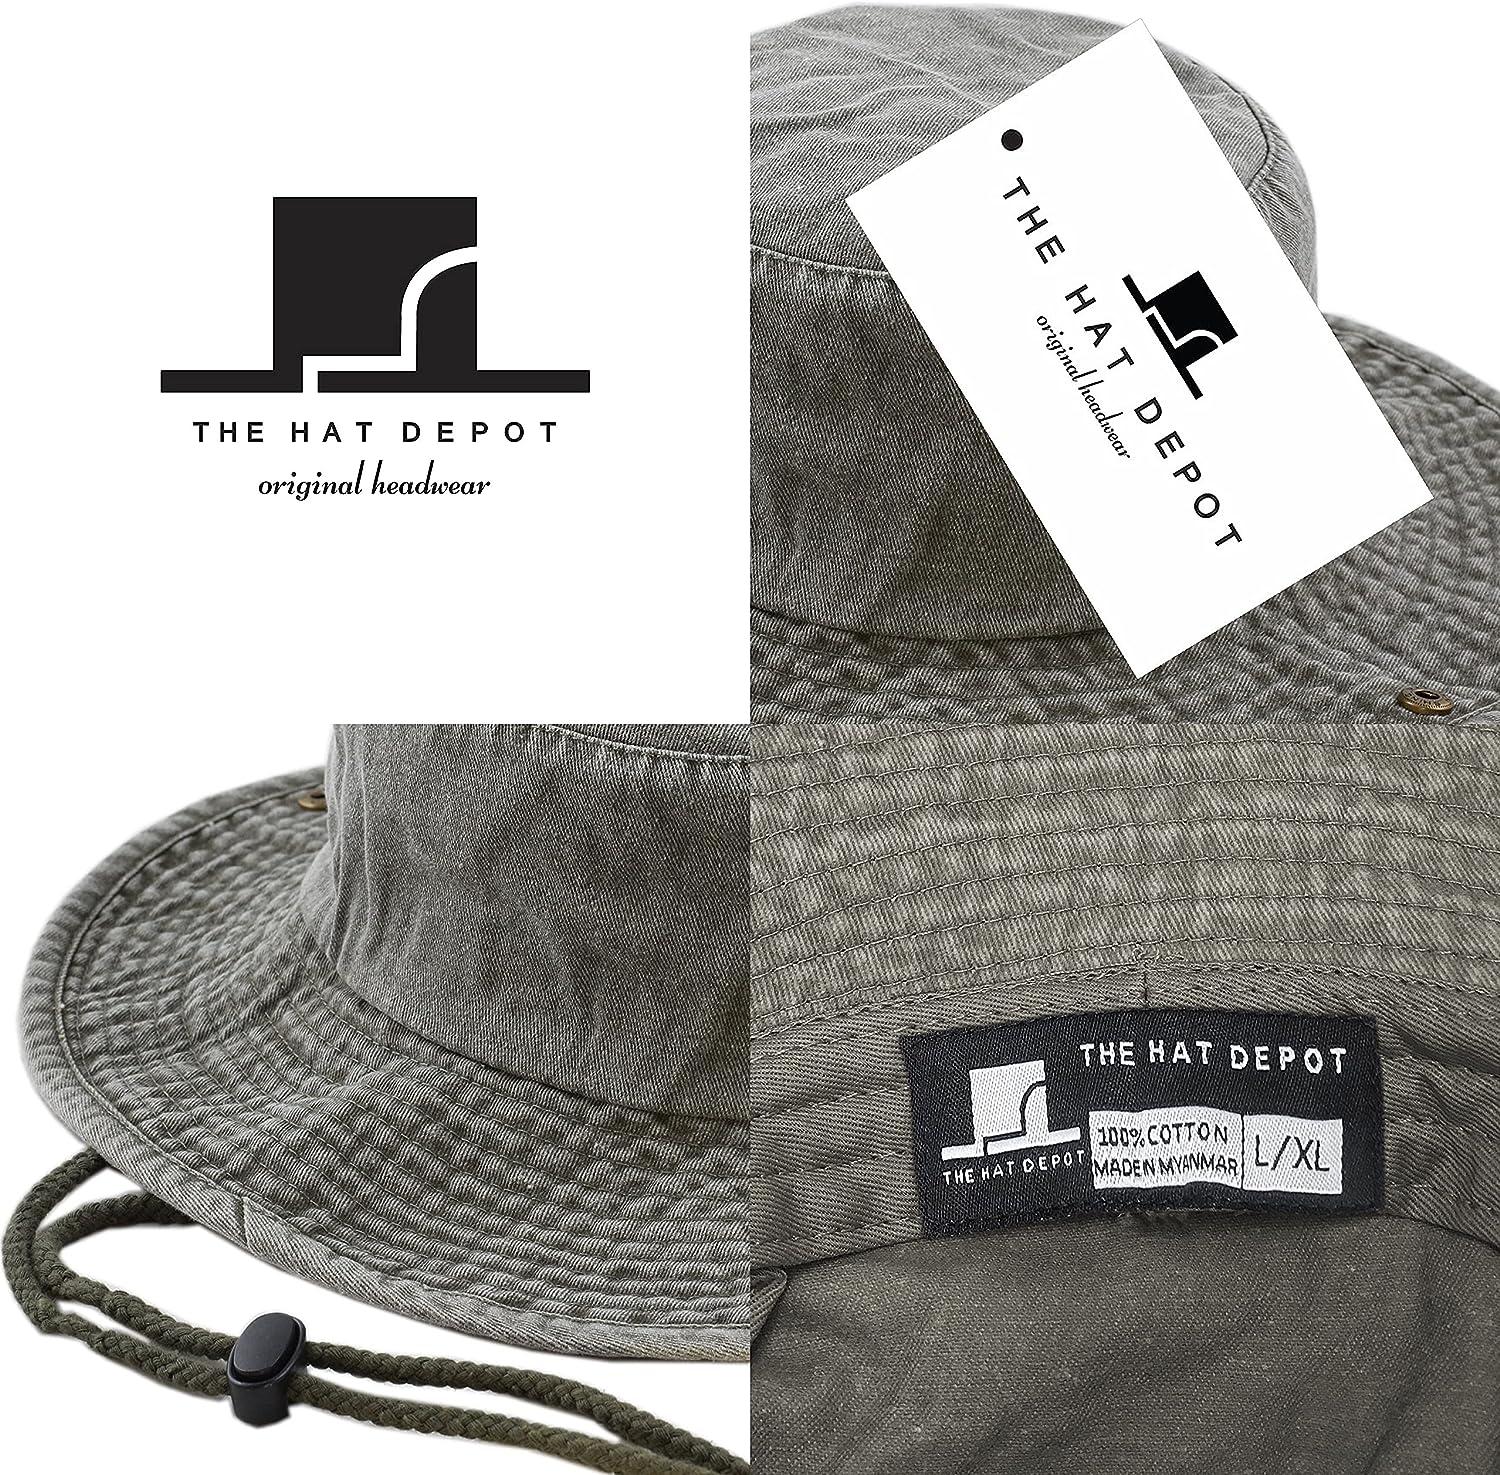 The Hat Depot Cotton Stone-Washed Safari Wide Brim Foldable Double-Sided Sun  Boonie Bucket Hat Large-X-Large 3. Pigment - Olive